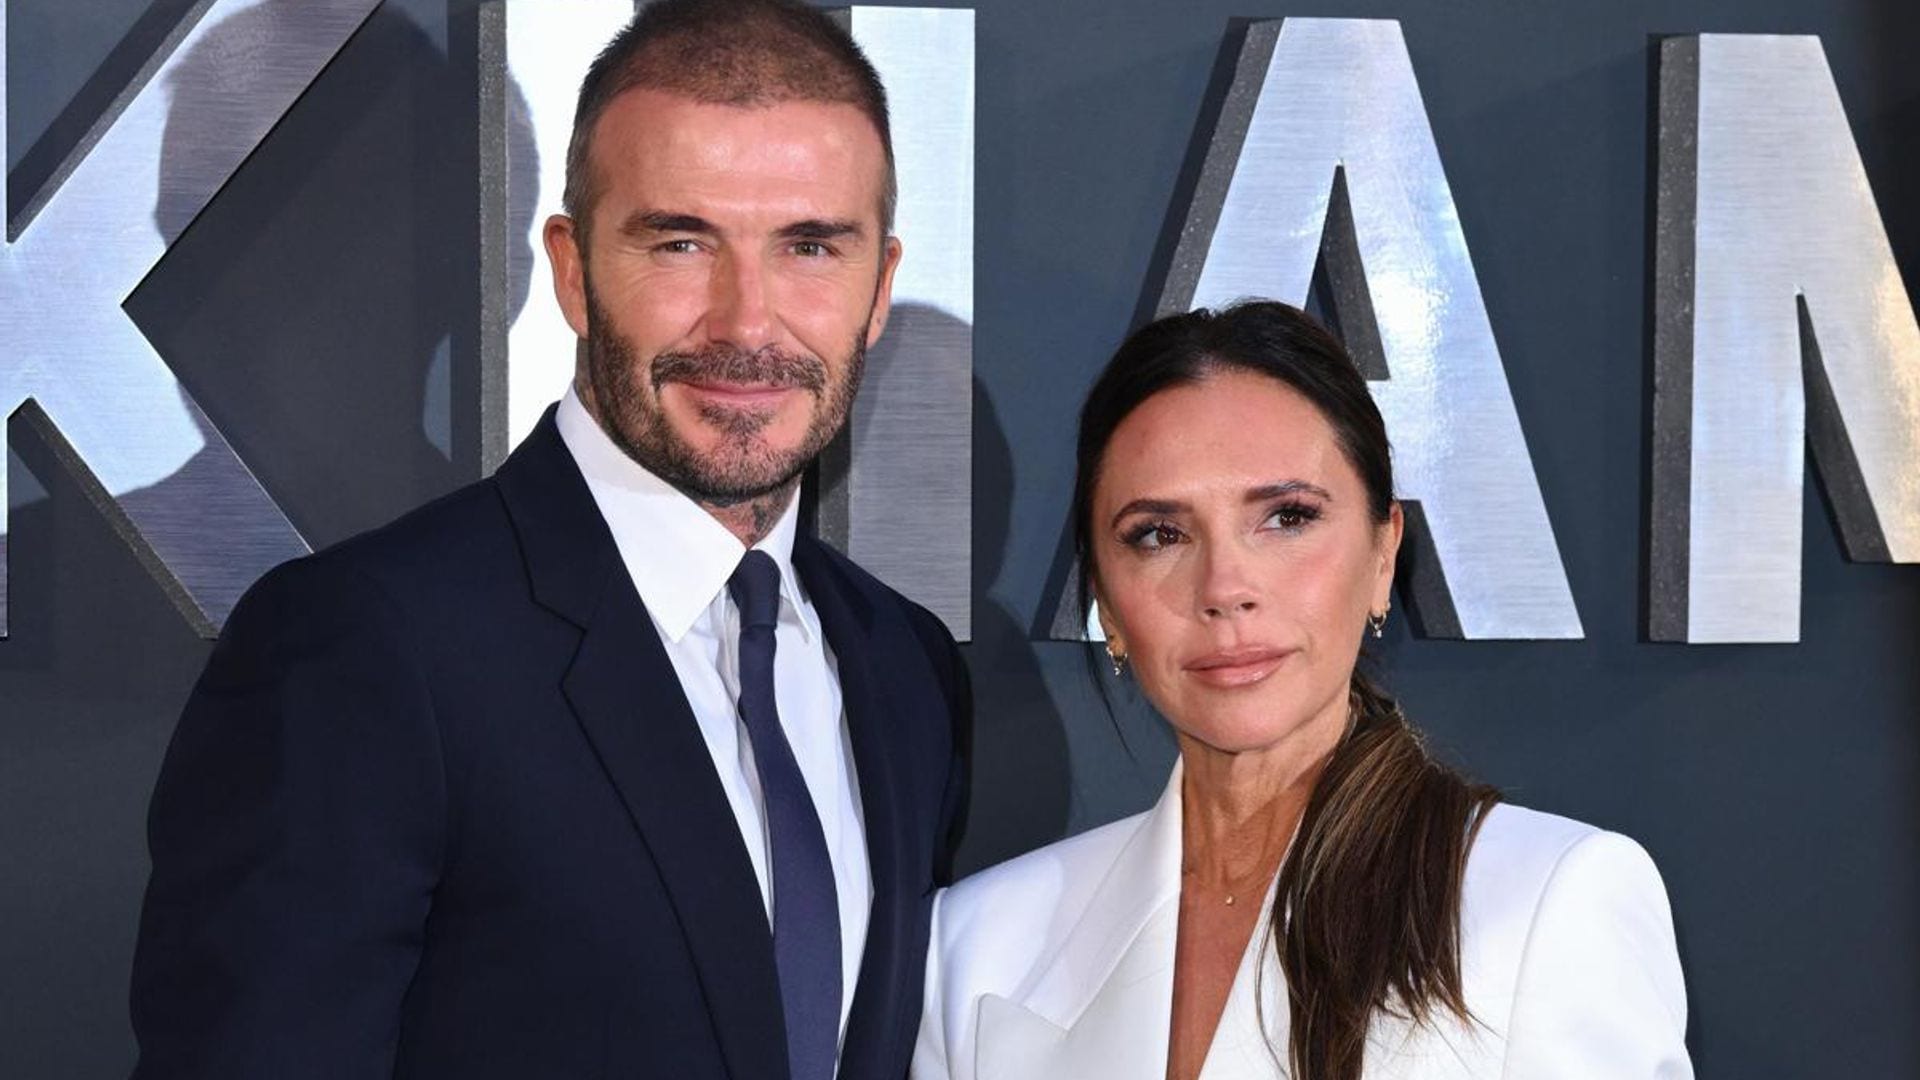 David Beckham got emotional reflecting on his marriage with Victoria: ‘We were 21 and 22 when we met’